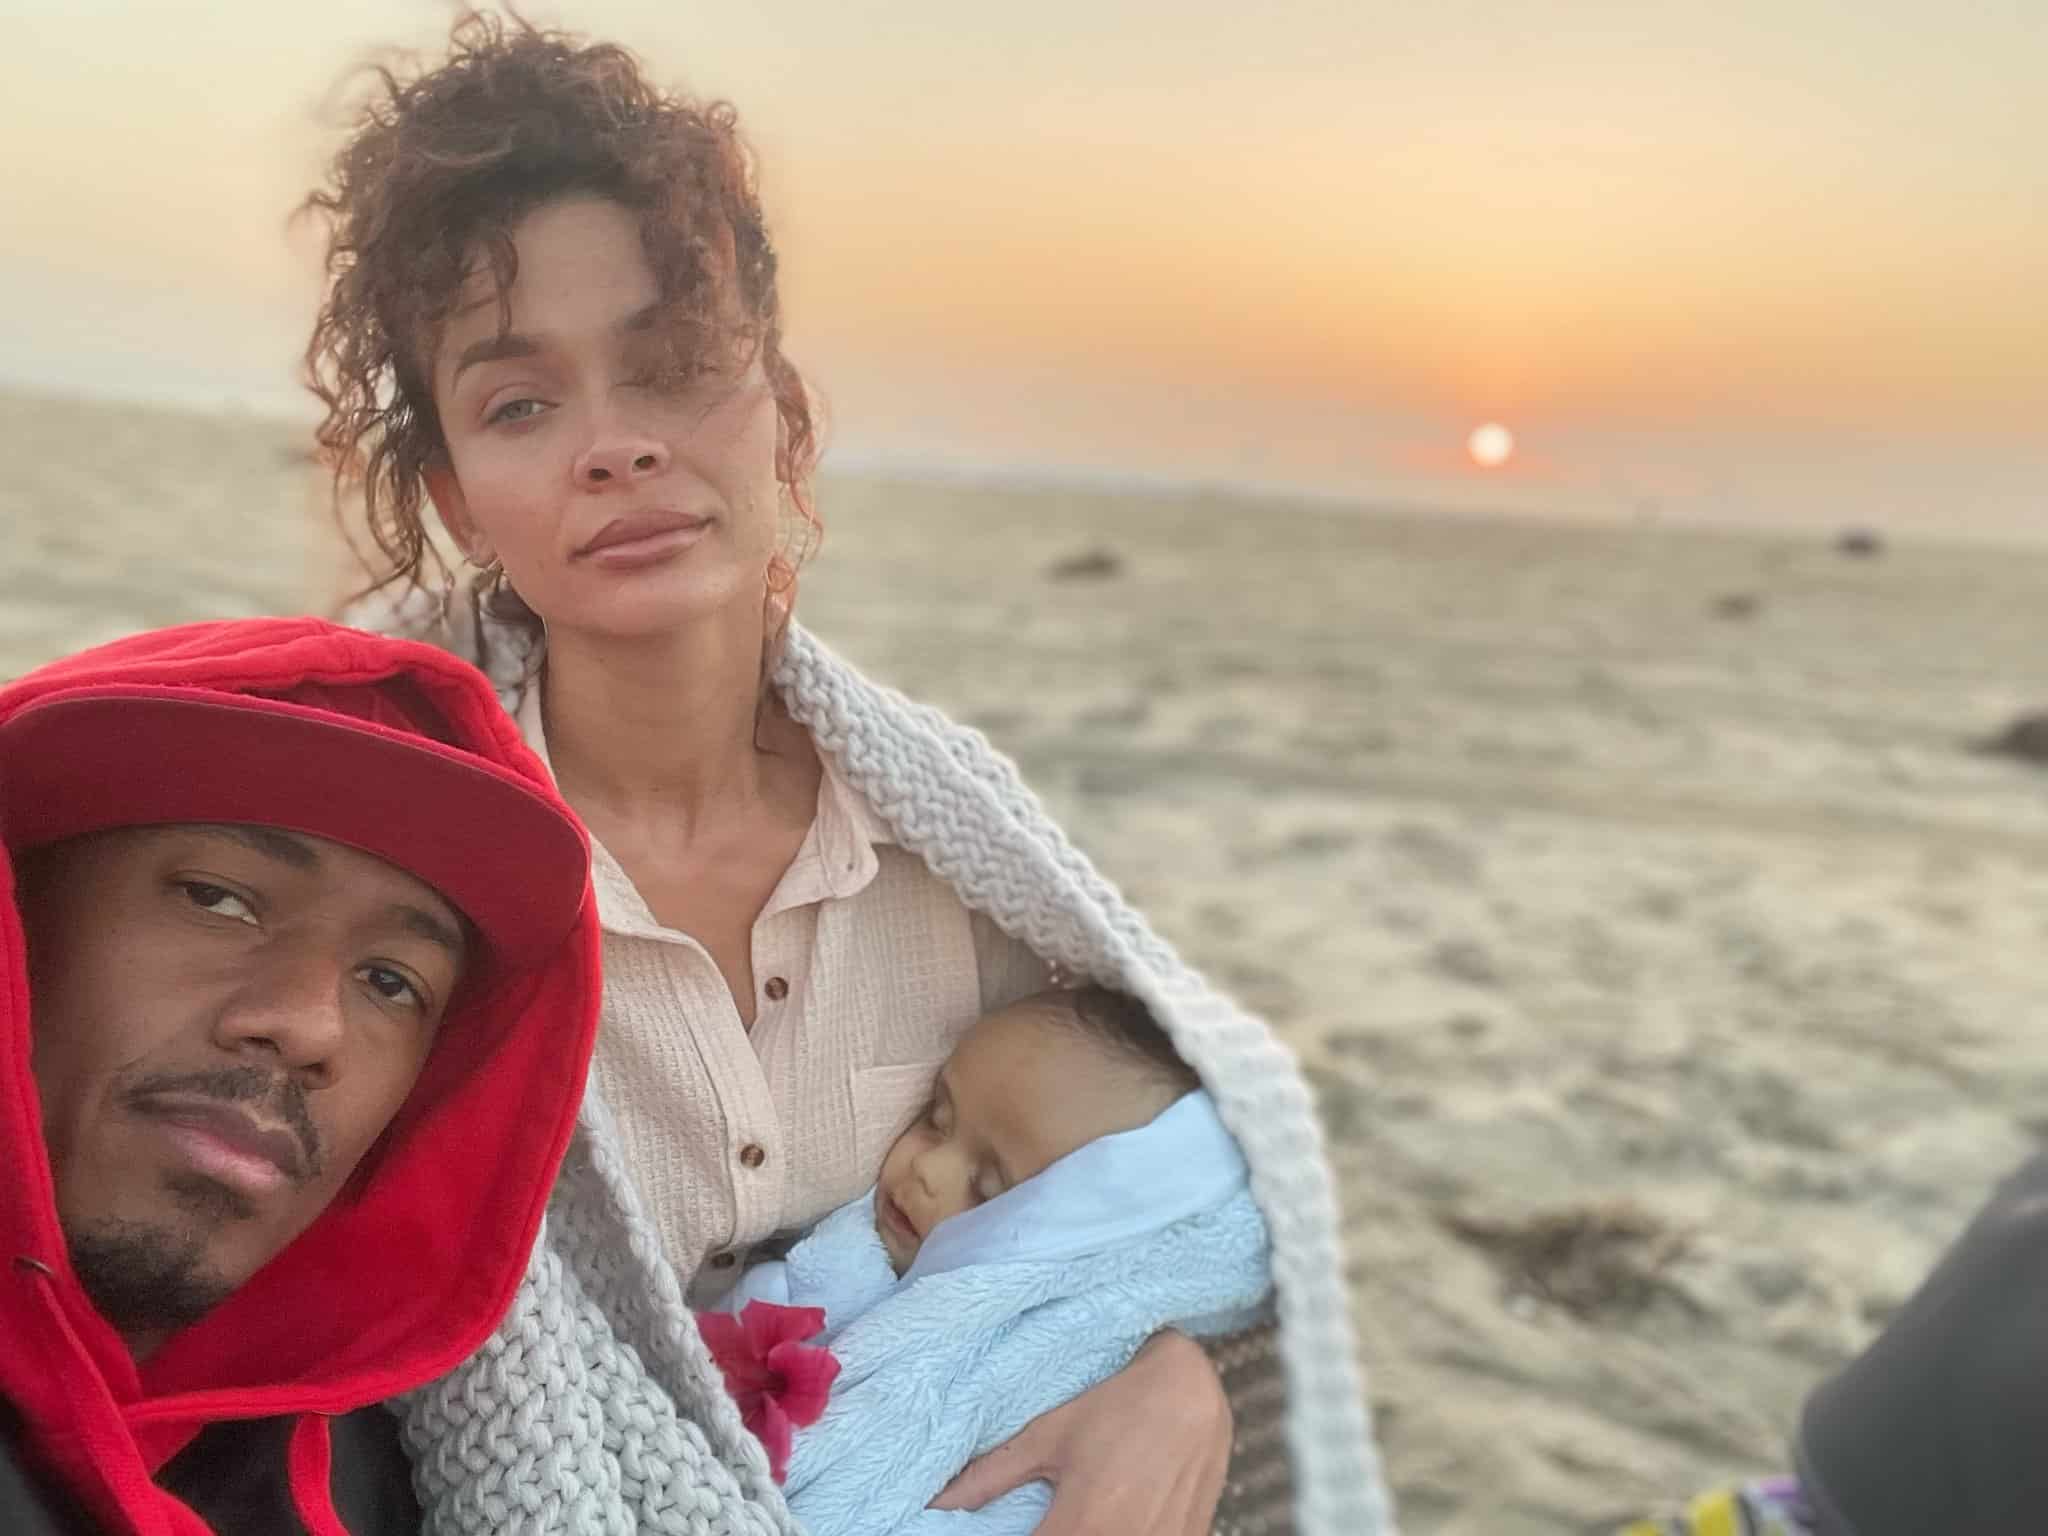 Nick Cannon shares that his 5-month-old son Zen Cannon passed away over the weekend after battling a form of brain cancer.